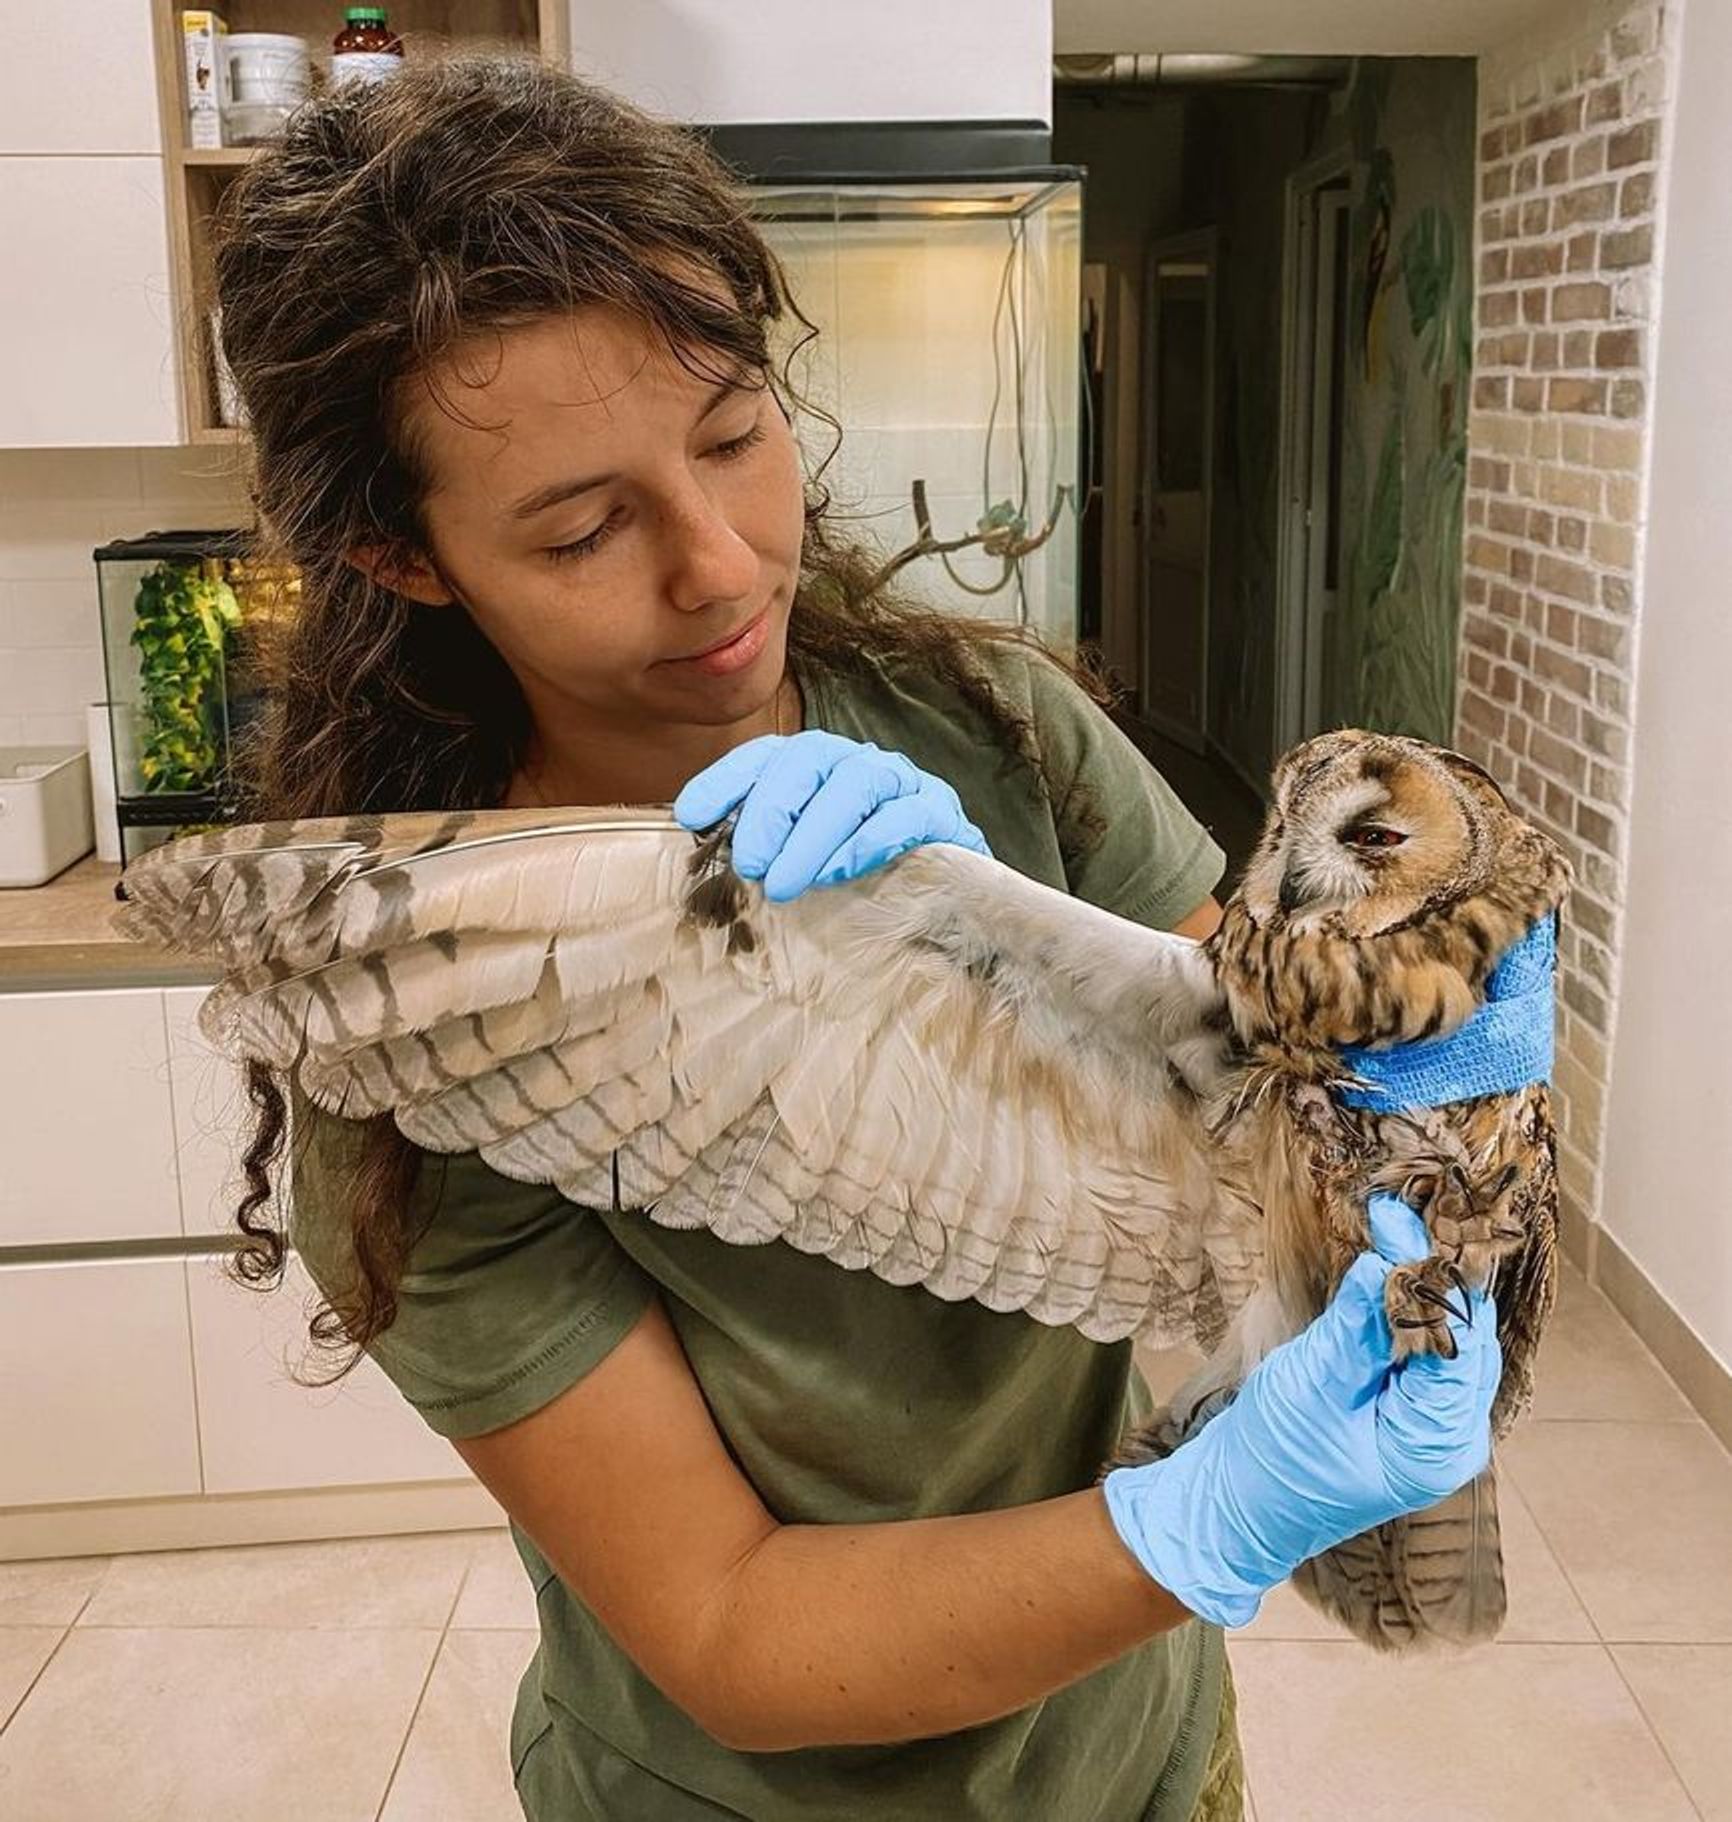 The owl rescued by the Stoyanovs managed to recover from a compound wing fracture